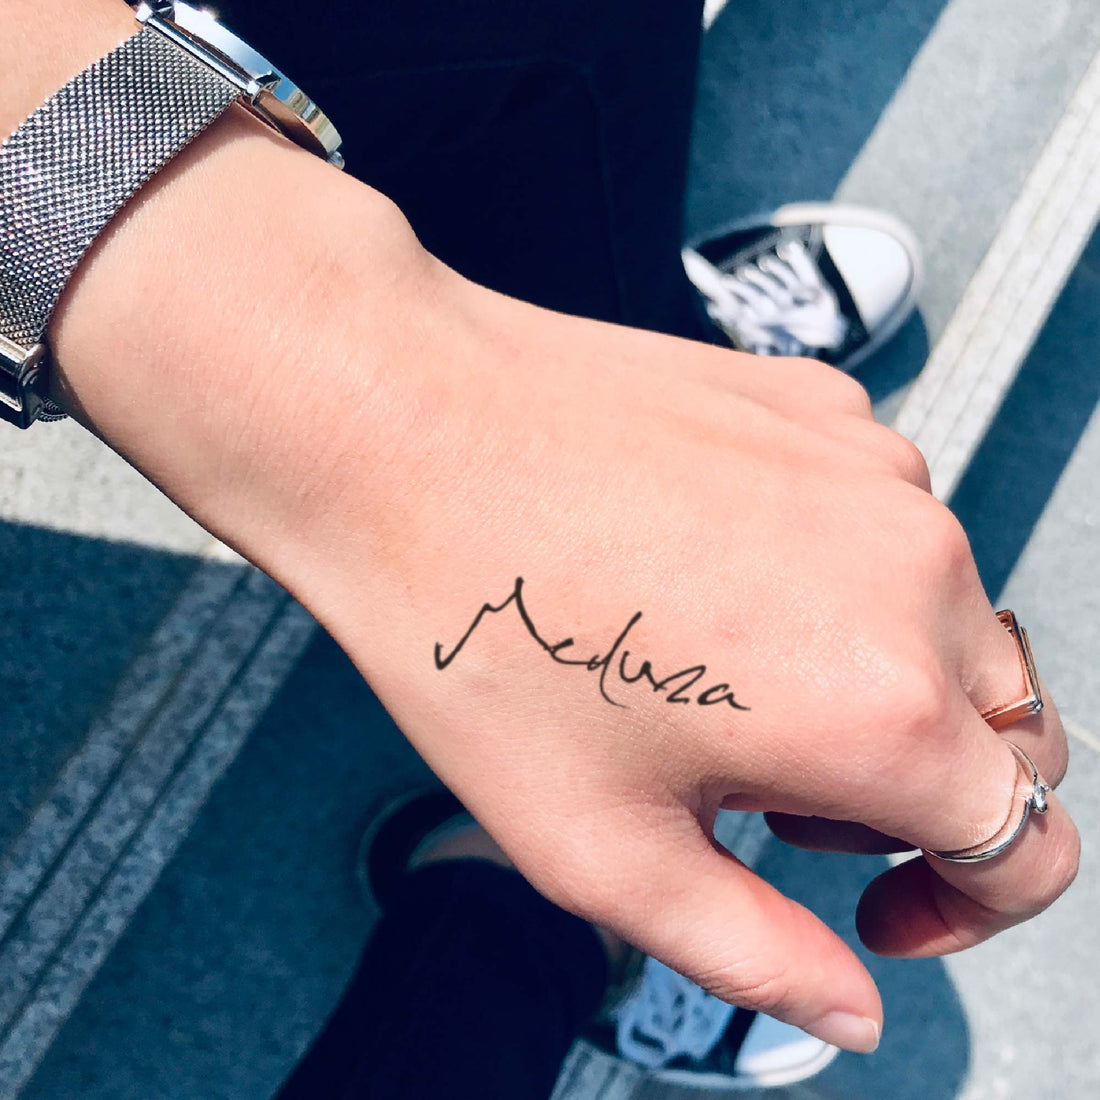 Meduza custom temporary tattoo sticker design idea inspiration meanings removal arm wrist hand words font name signature calligraphy lyrics tour concert outfits merch accessory gift souvenir costumes wear dress up code